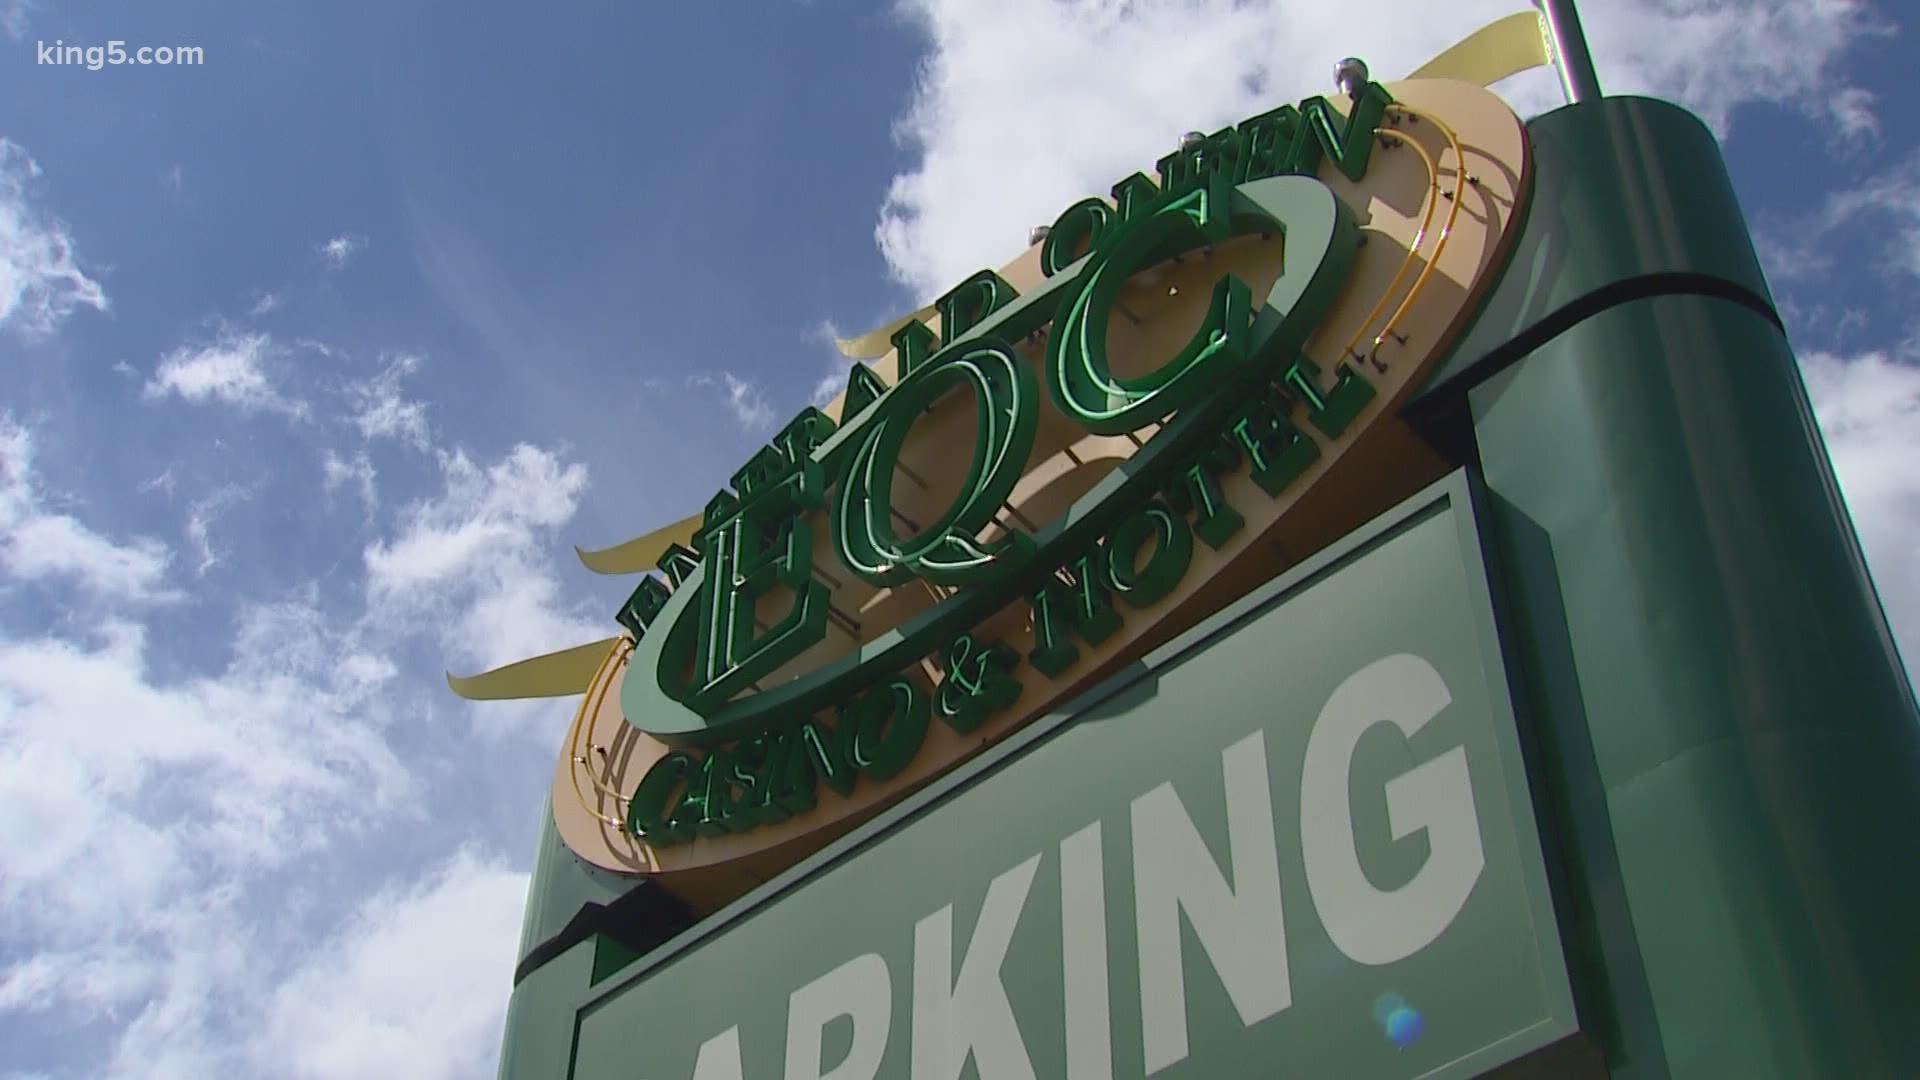 Staff at the Emerald Queen Casino in Fife were on-site Friday preparing for the reopening of the casino Monday, May 18. There will be several restrictions in place.